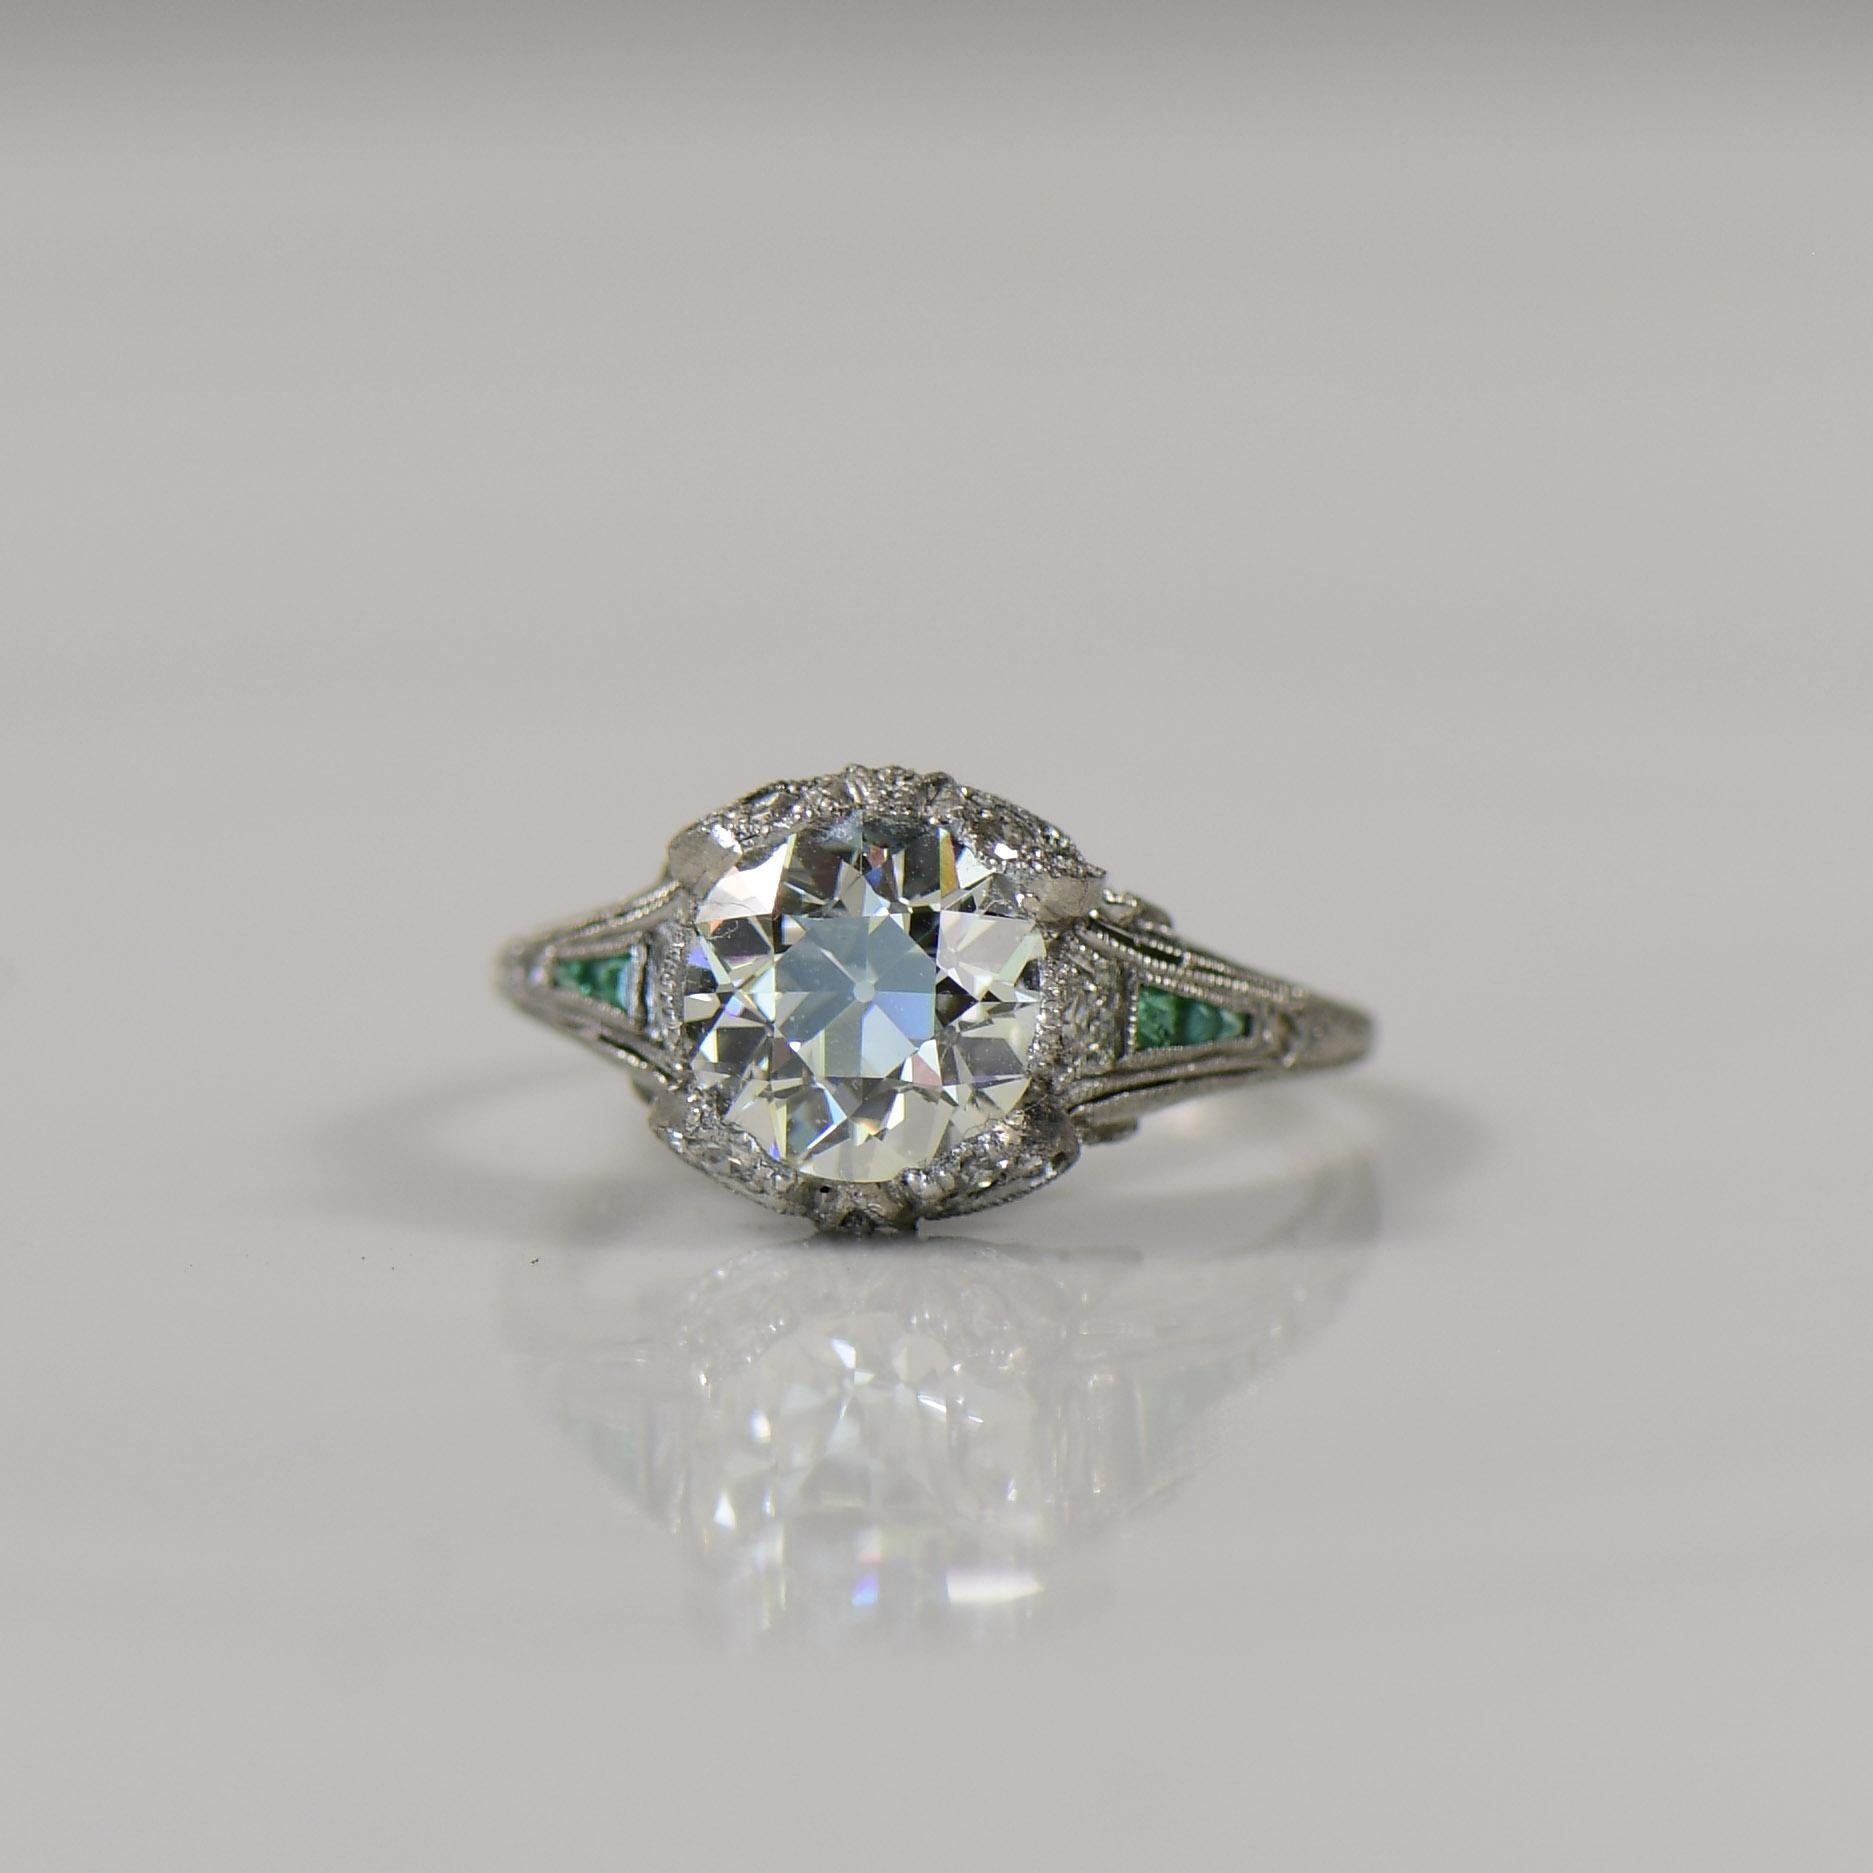 This exquisite early Art Deco ring from the 1920s features a striking platinum bow motif, capturing the essence of the era's glamour and geometric design. The centerpiece showcases a radiant old euro cut, drawing attention with its timeless